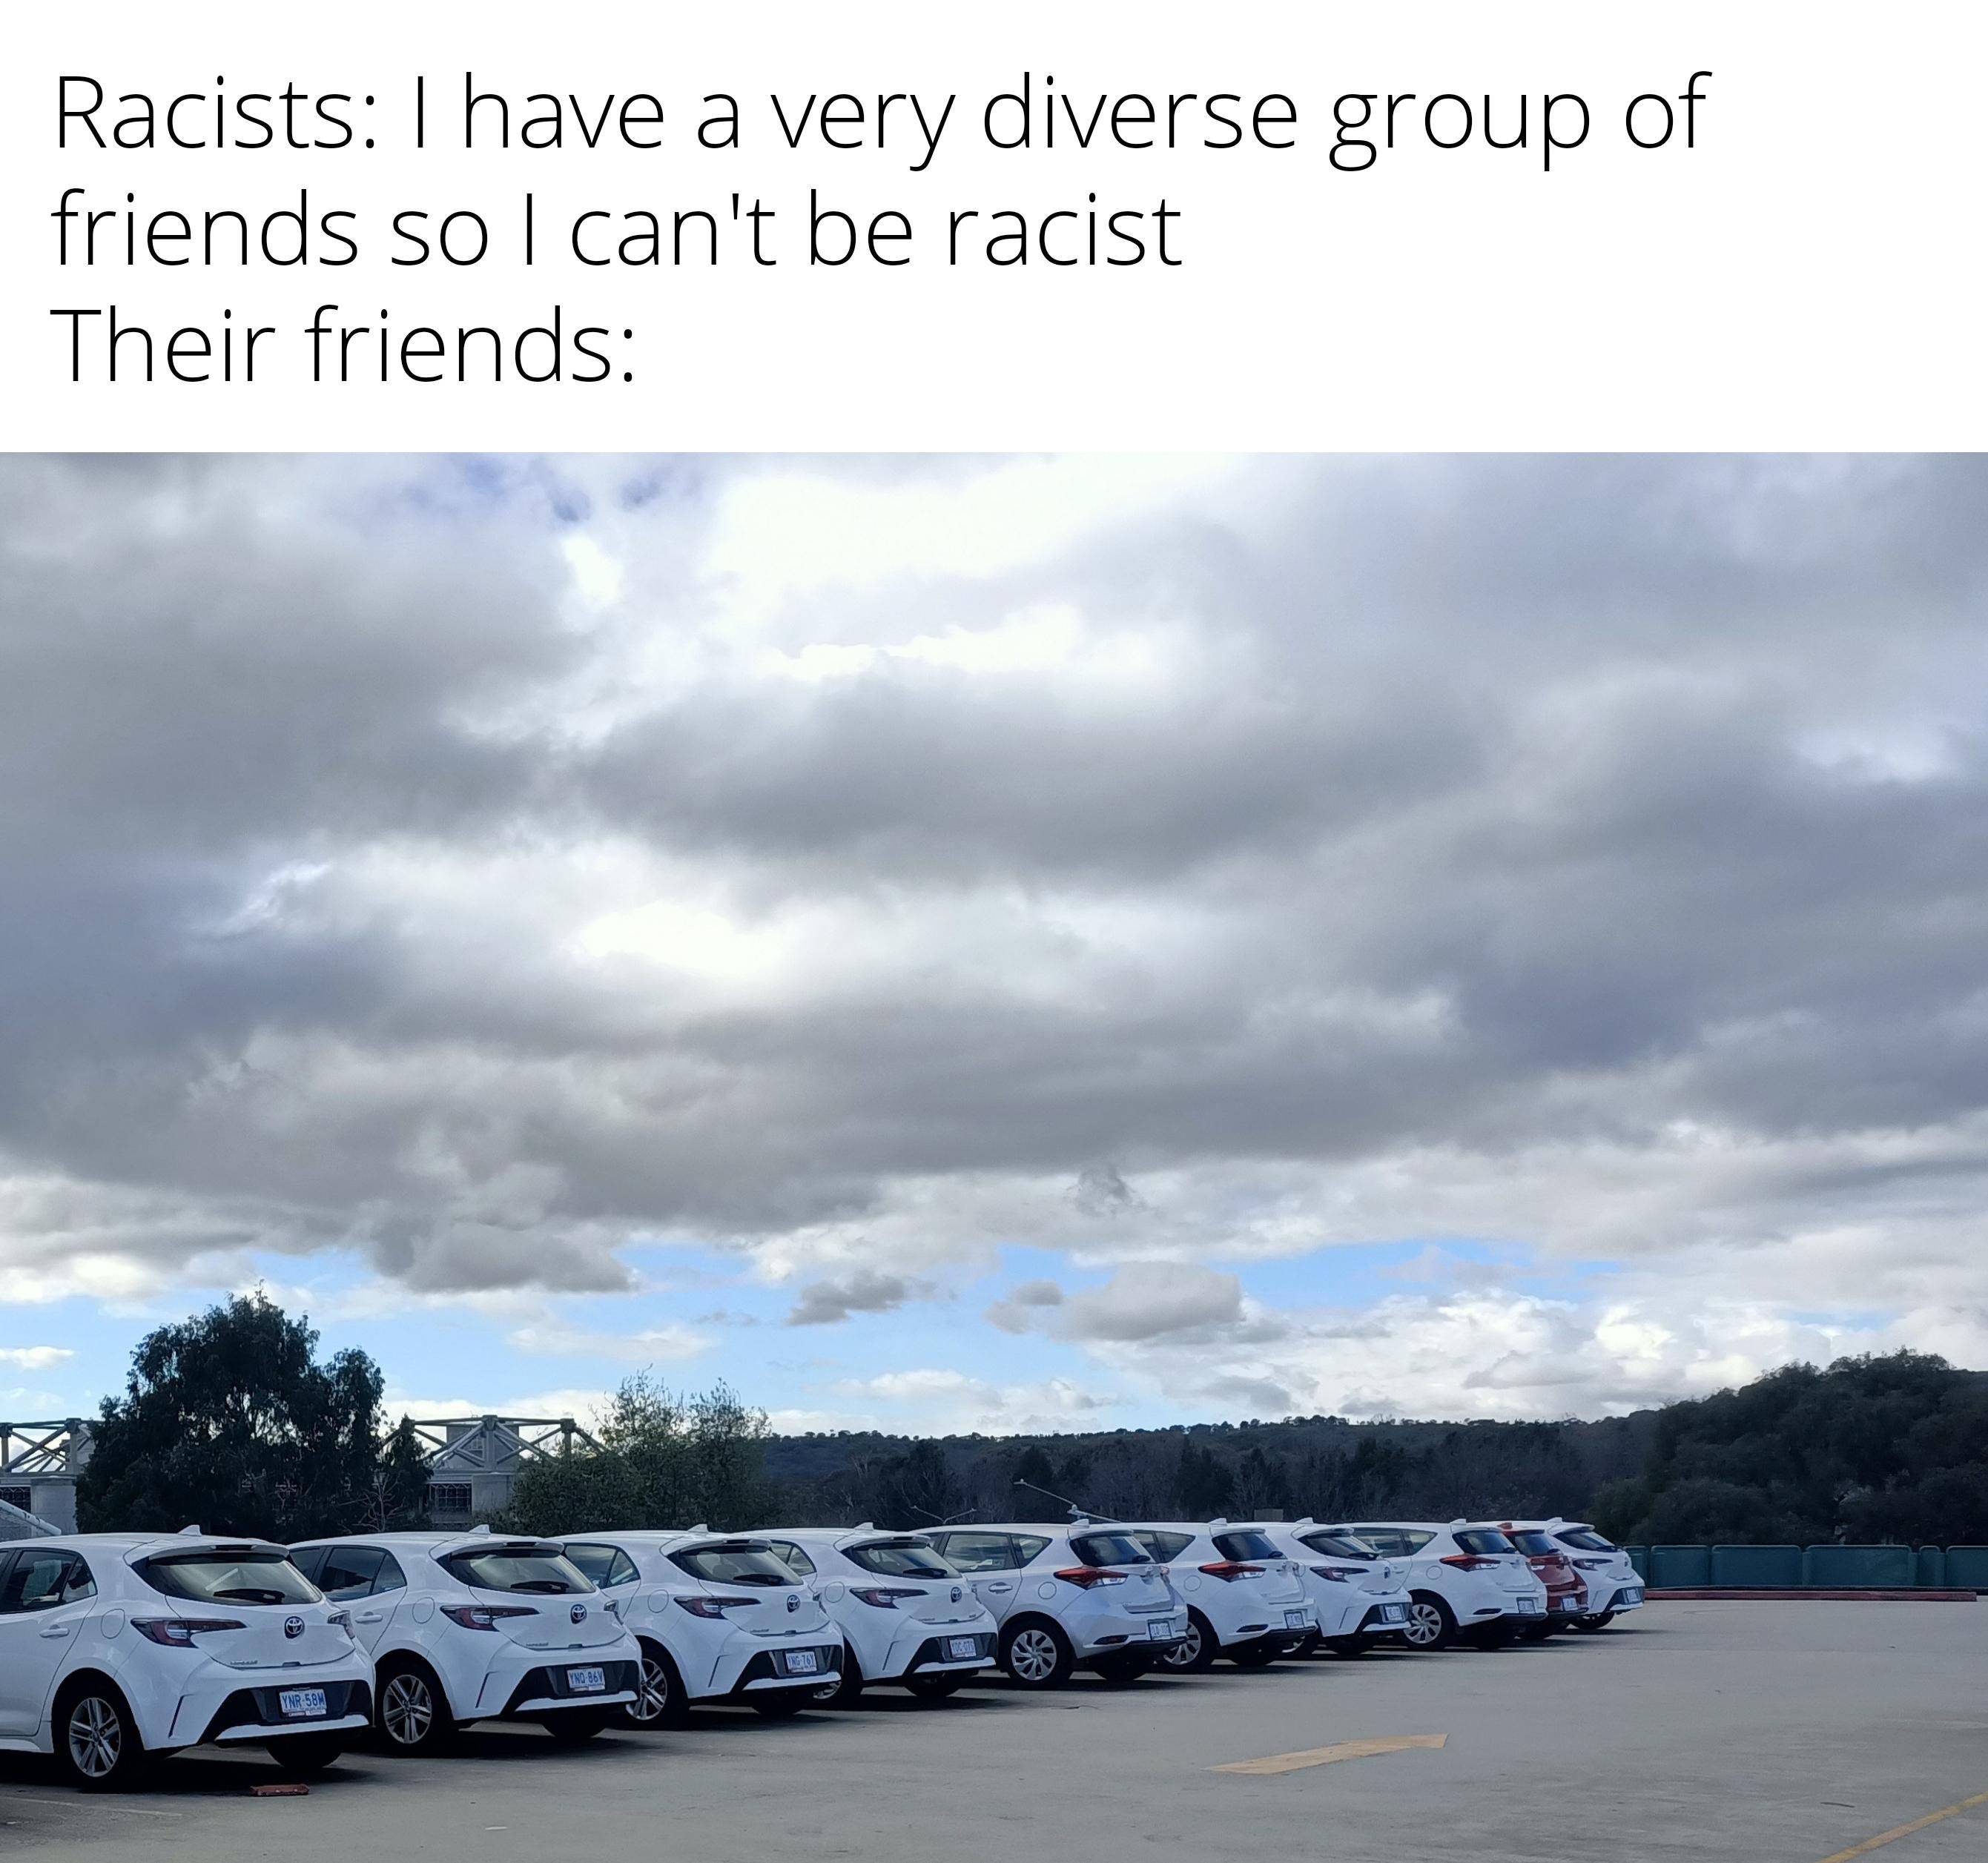 "I'm not racist, I have black friends"